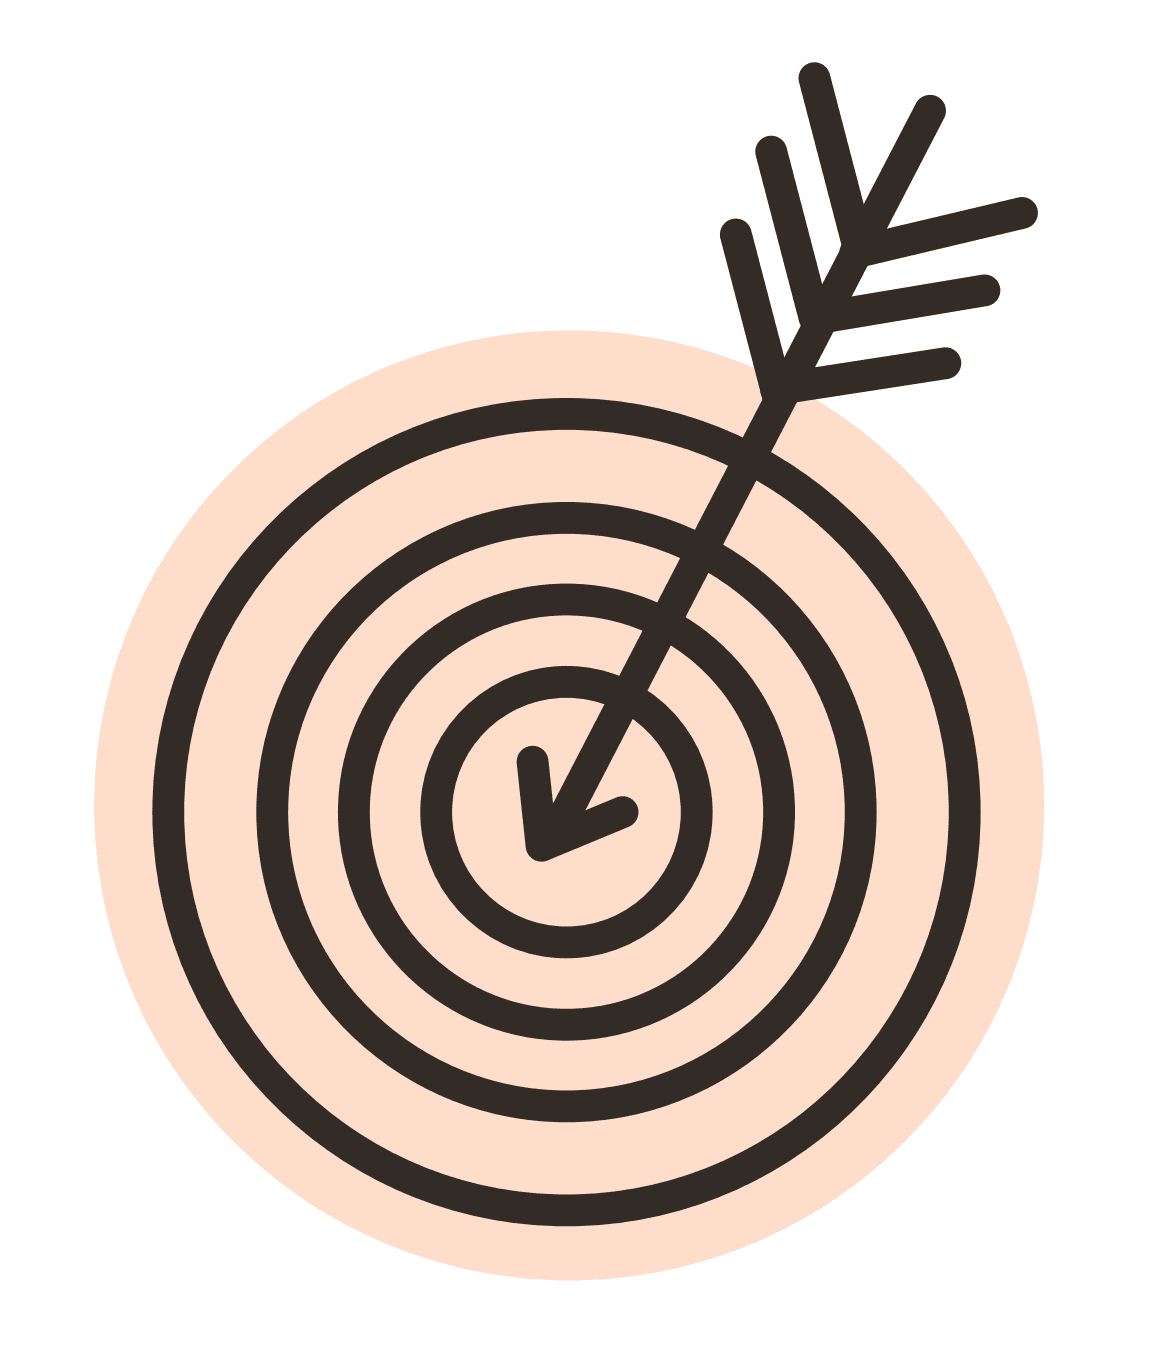 Illustration of concentric circles forming a bull's eye, and a feathered arrow pointing to it